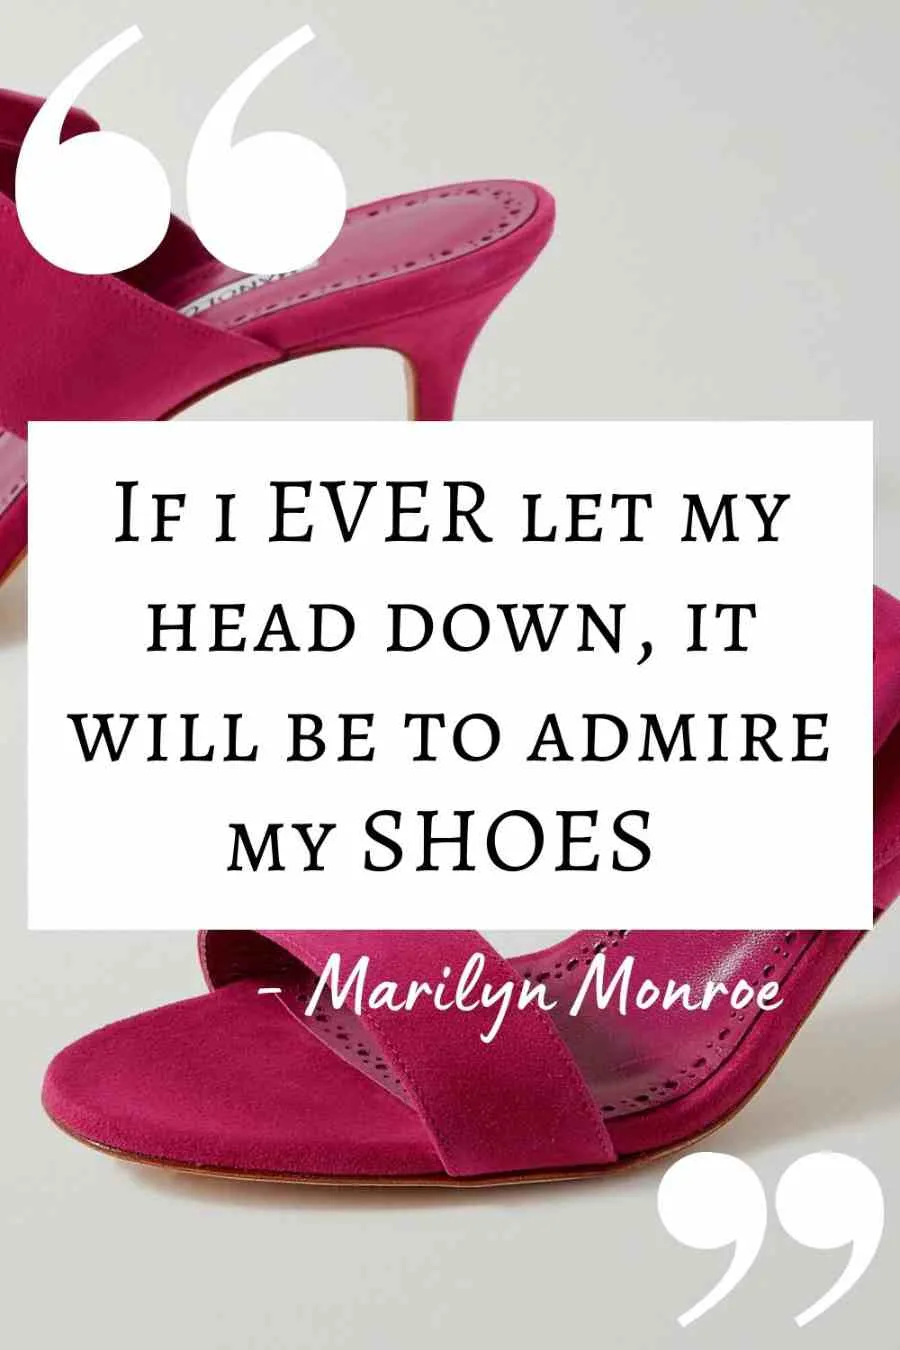 Shoe Quote by Marilyn Monroe about shoes: 